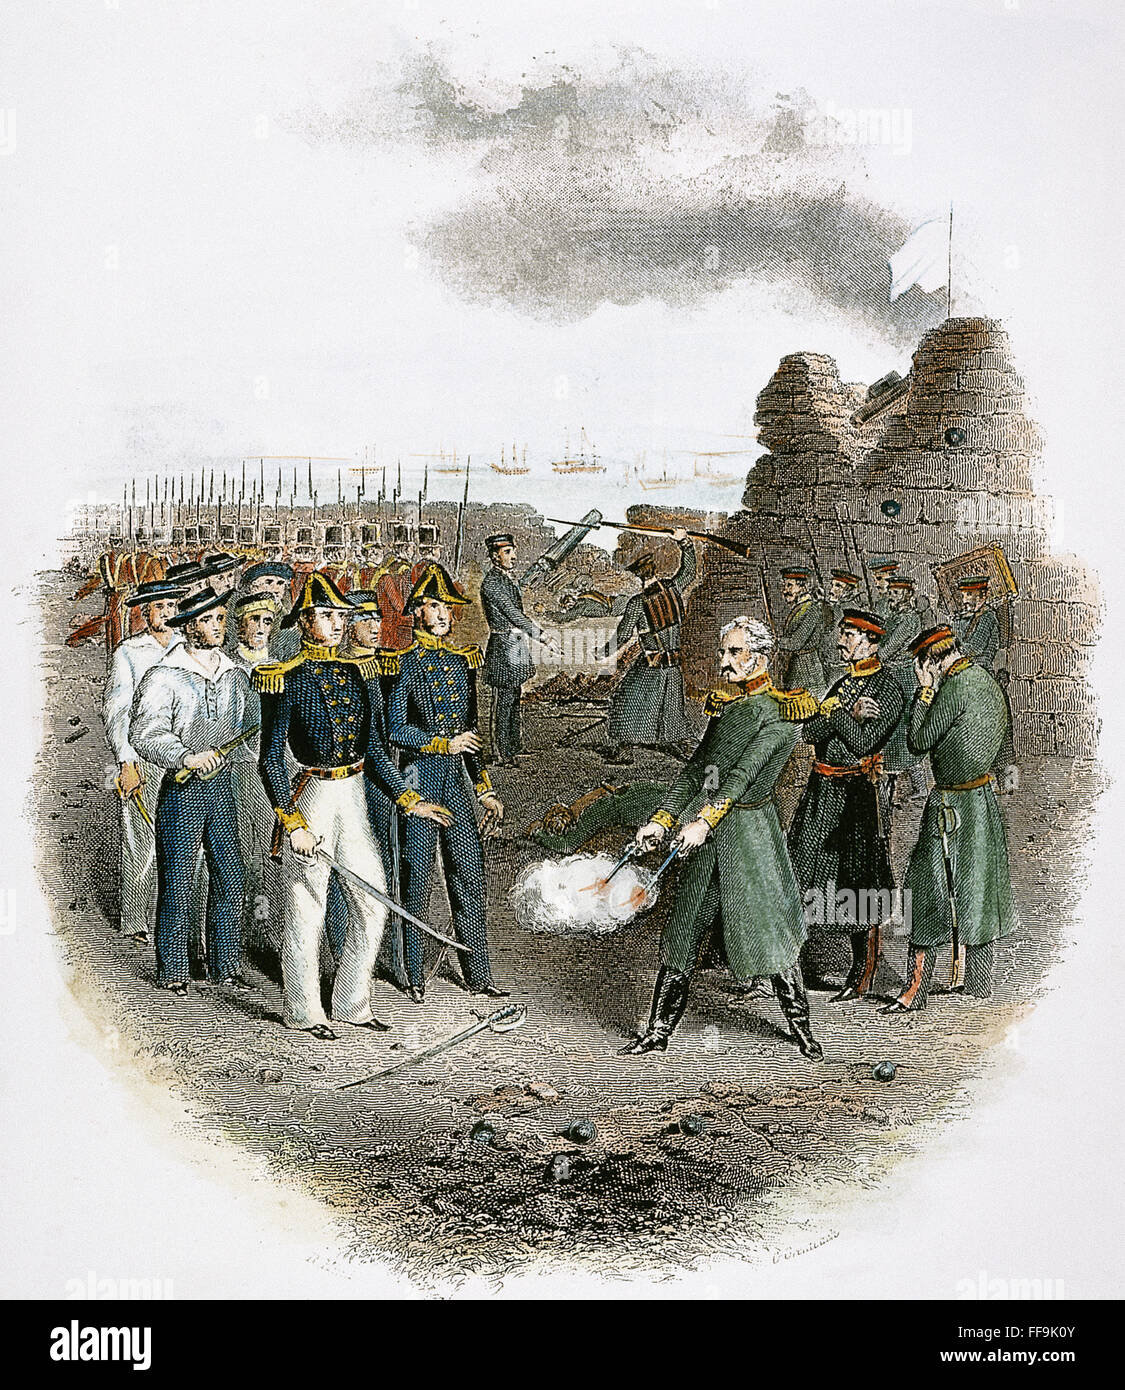 CRIMEAN WAR: KINBURN, 1855. /nThe governor of the Russian forts of Kinburn surrenders to the Allied forces after their bombardment of Kinburn, 17 October 1855, during the Crimean War: steel engraving, English, 19th century. Stock Photo